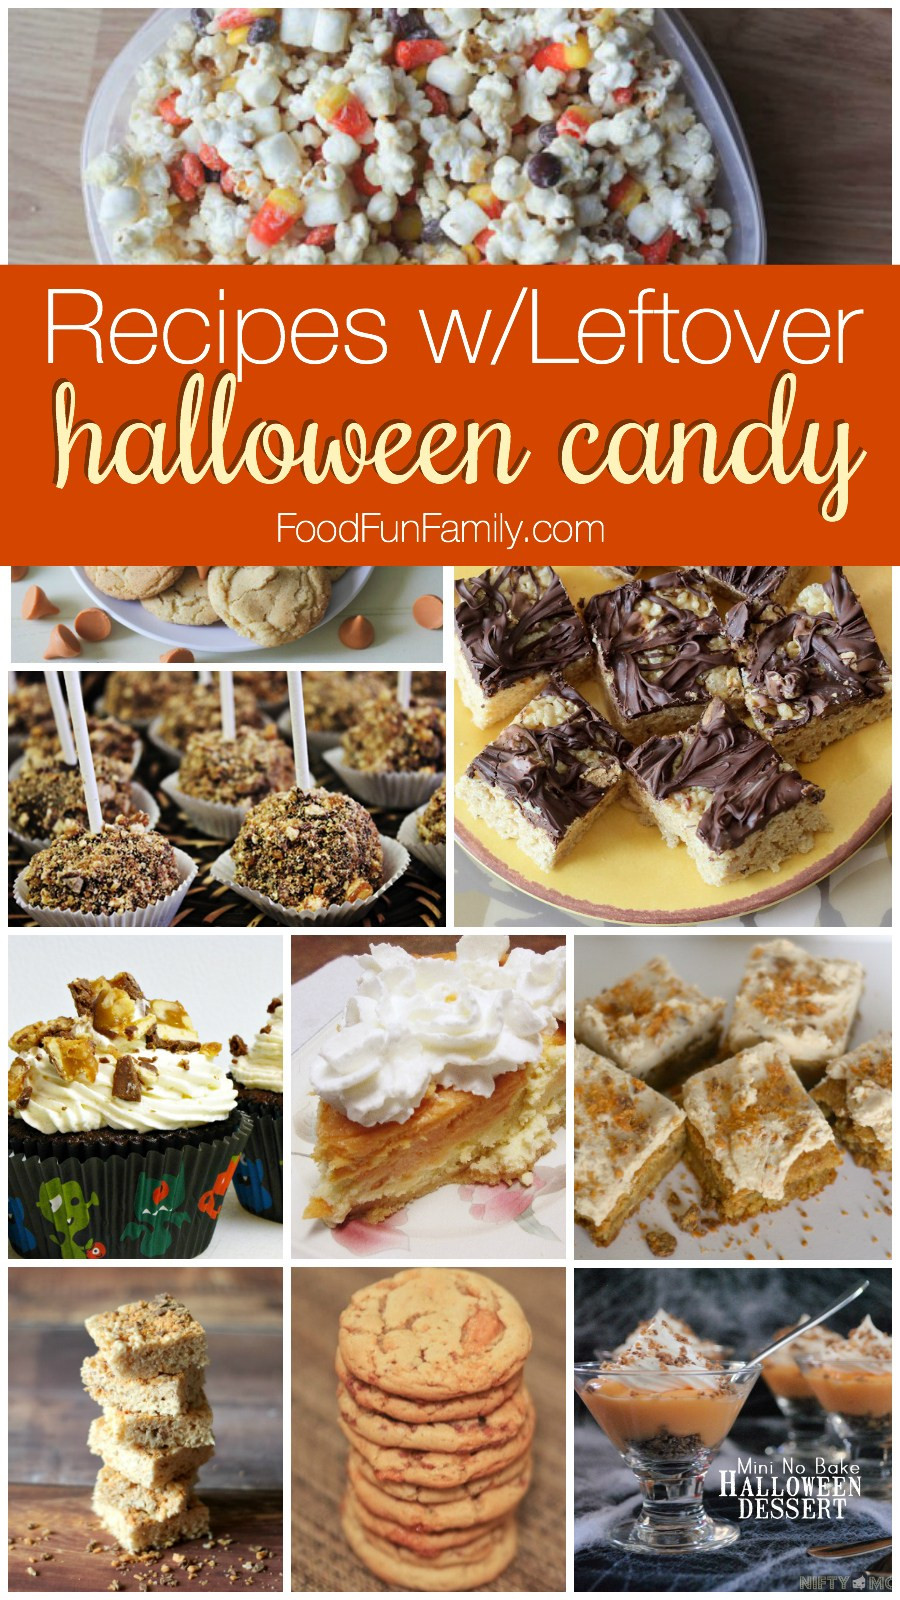 Leftover Halloween Candy Recipes
 Leftover Halloween Candy Recipes and Crafts